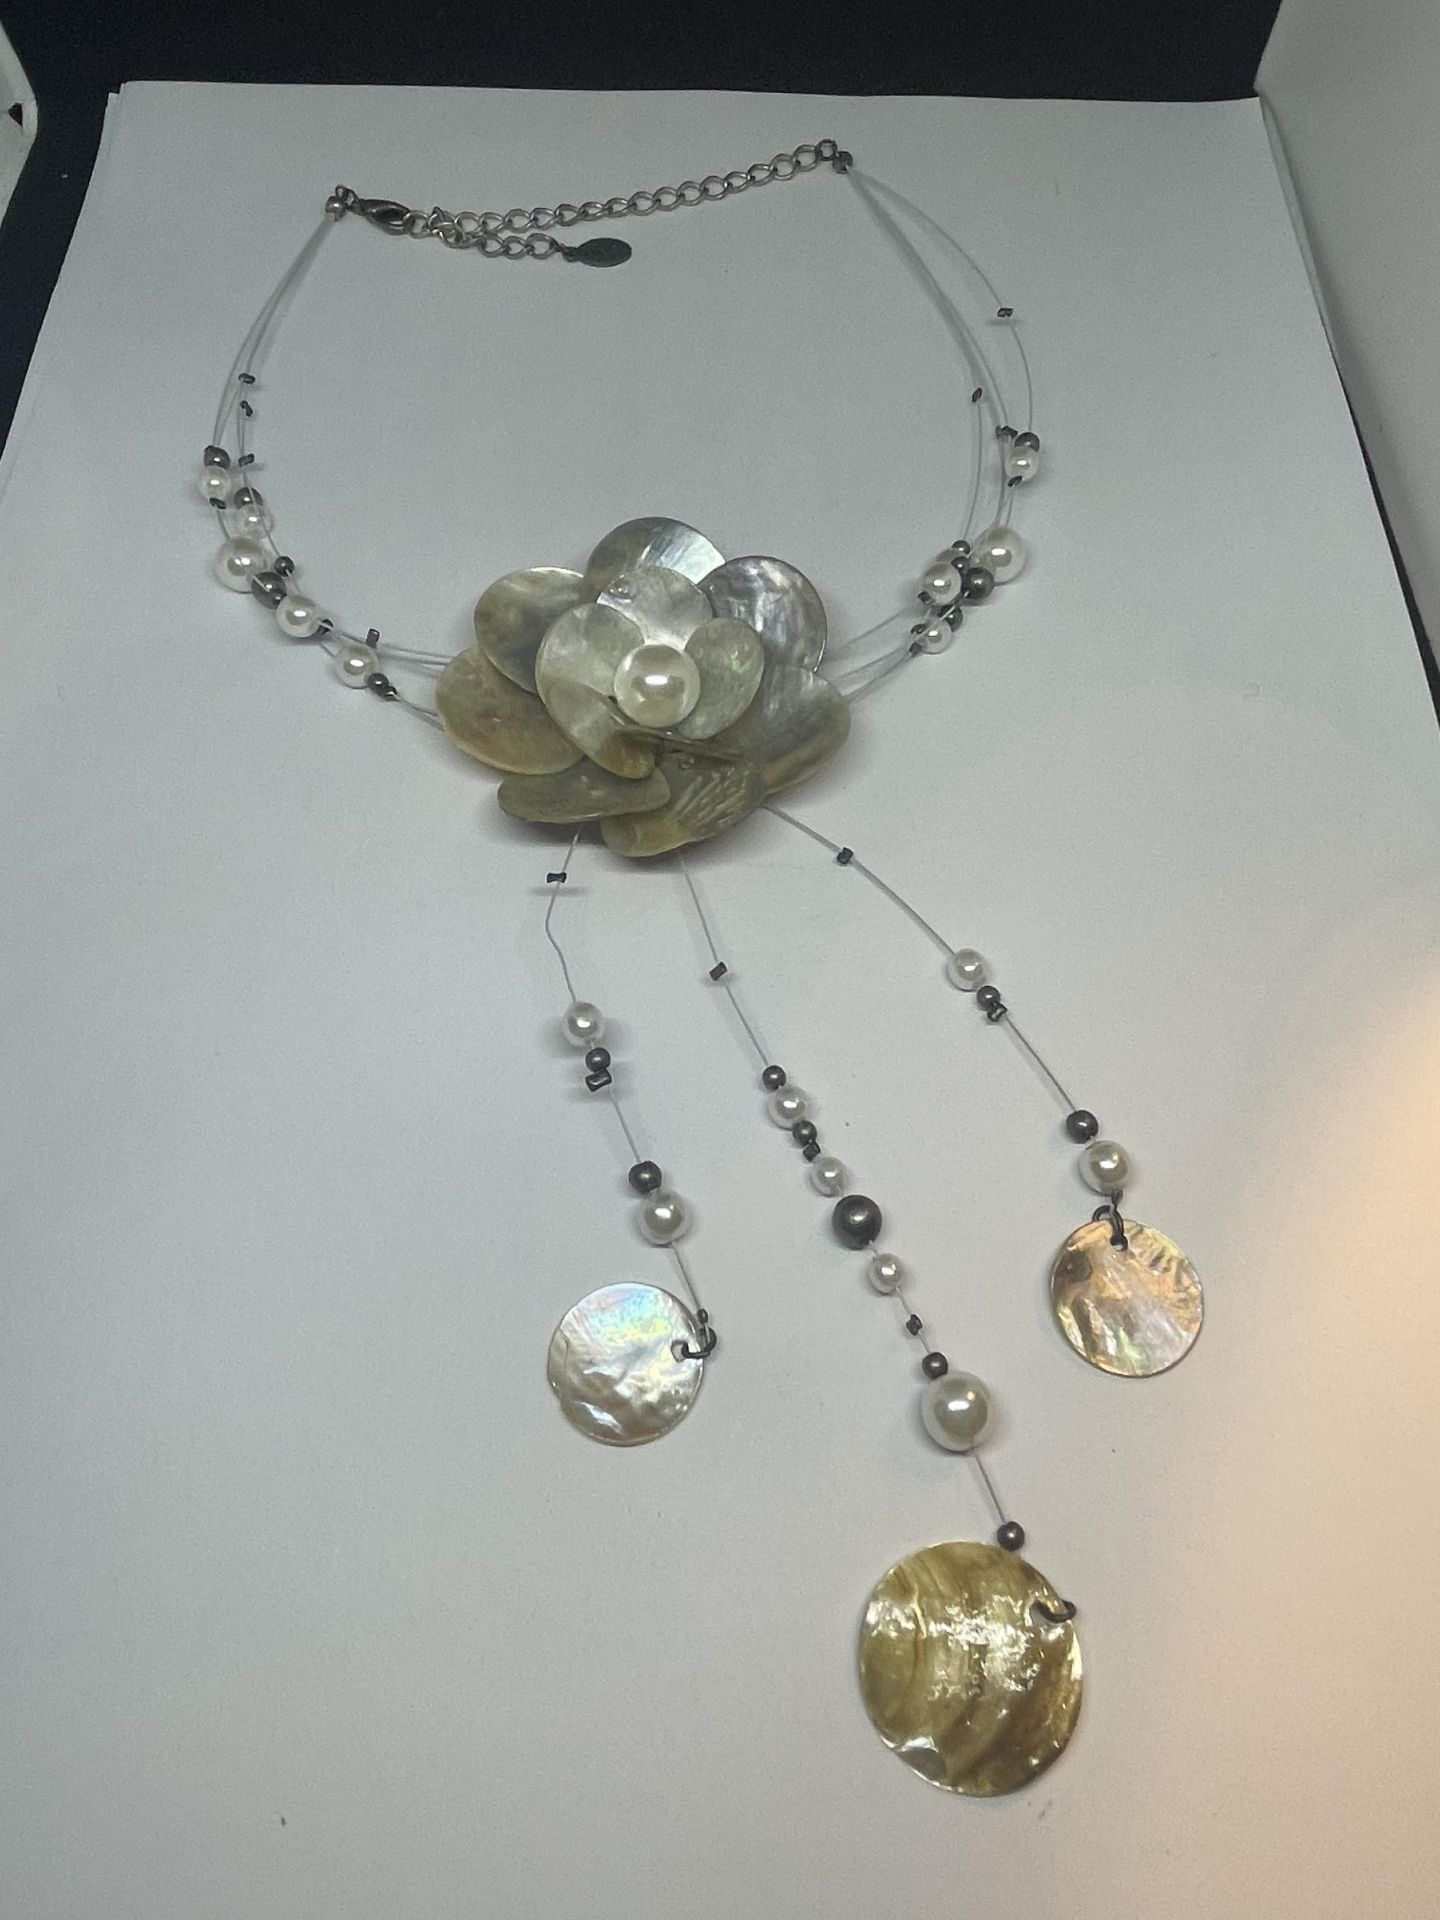 A DECORATIVE SHELL NECKLACE IN A FLOWER DESIGN